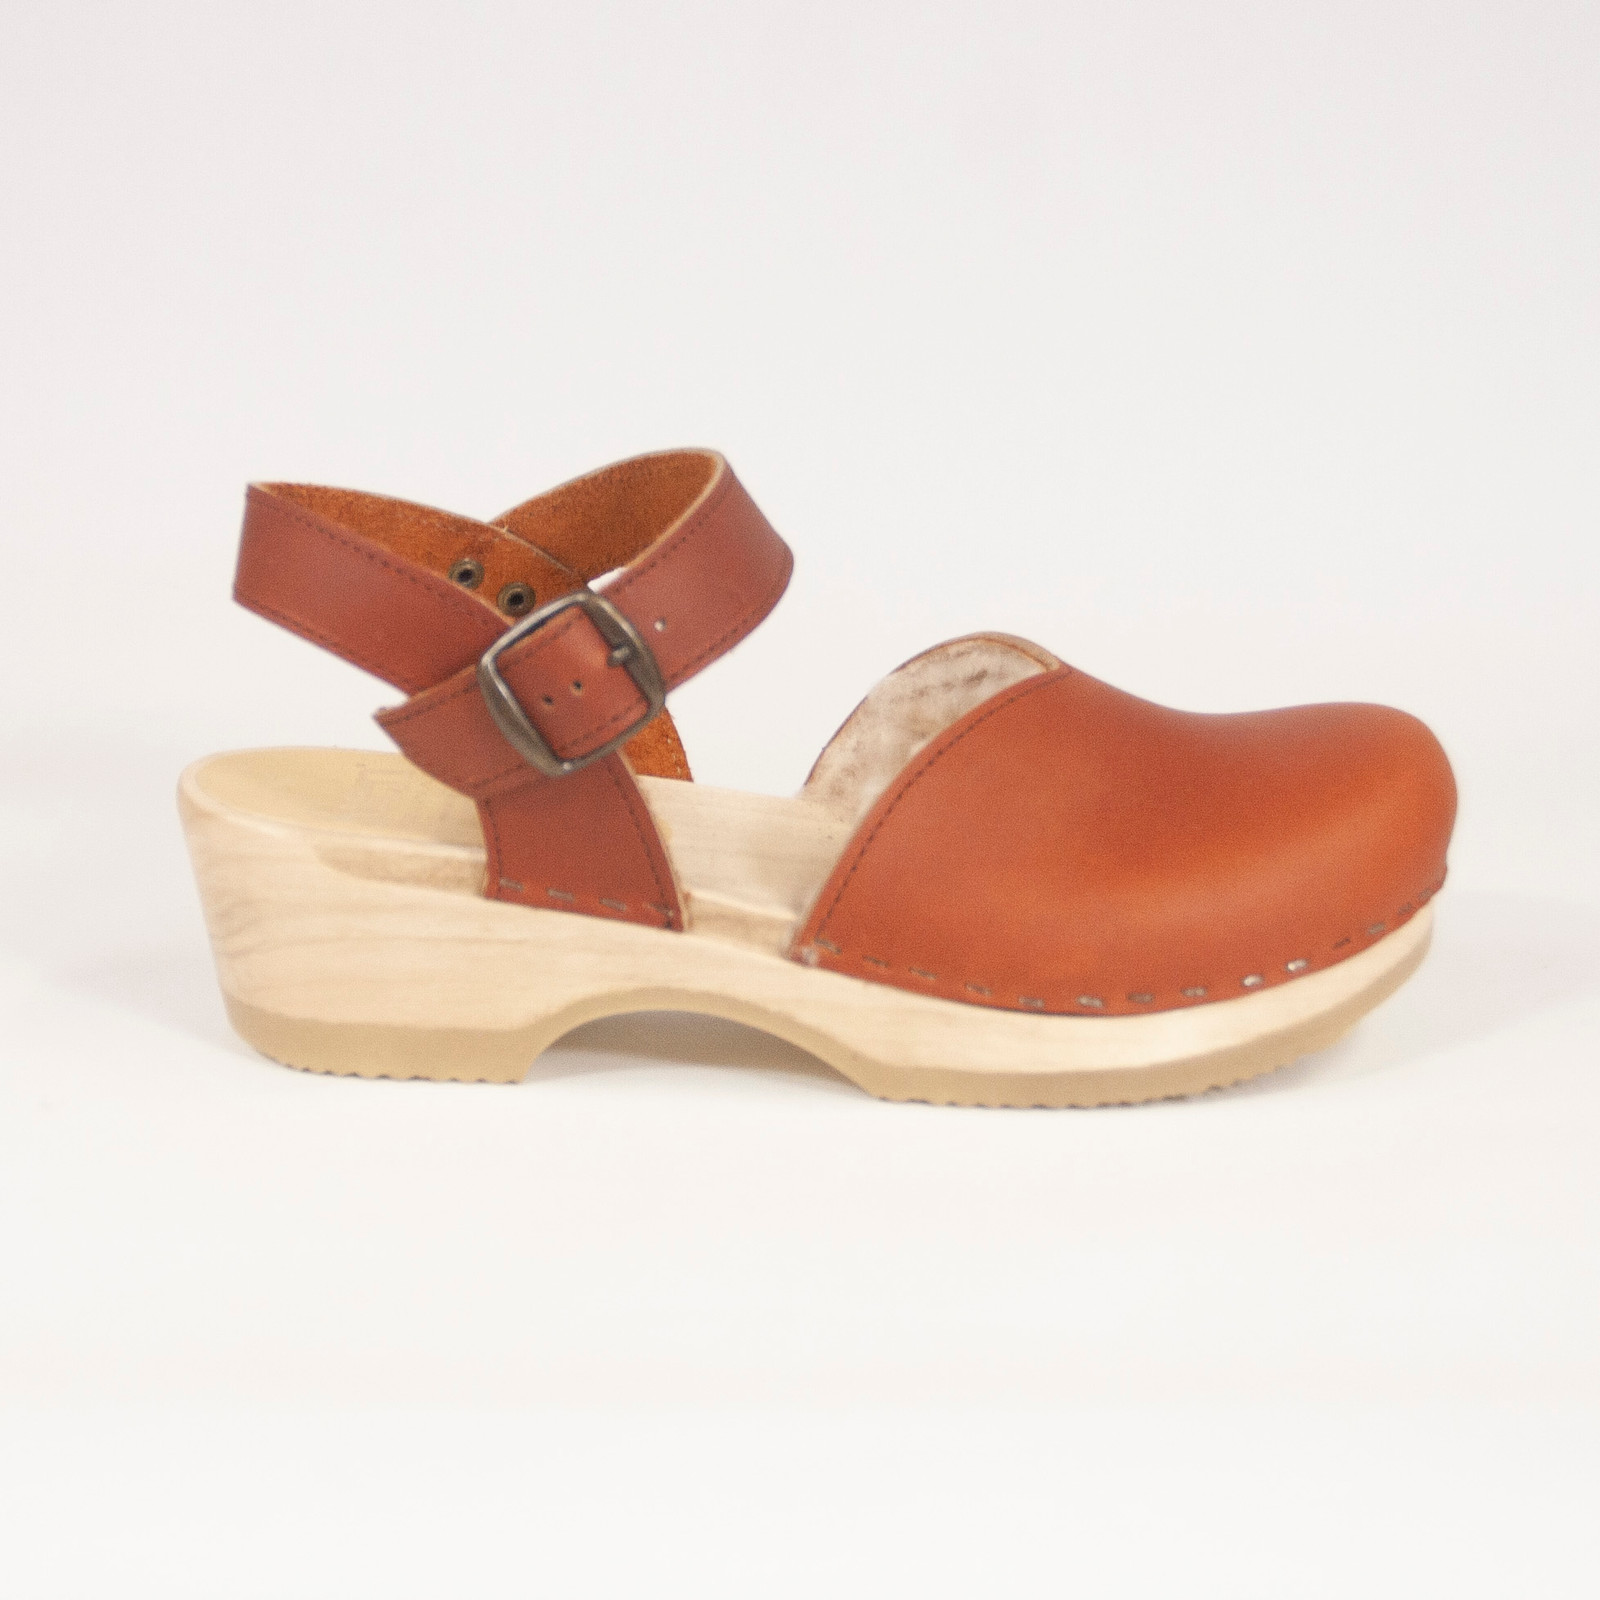 Mary Janes Fur Lined Clogs - Whiskey - Low Heel